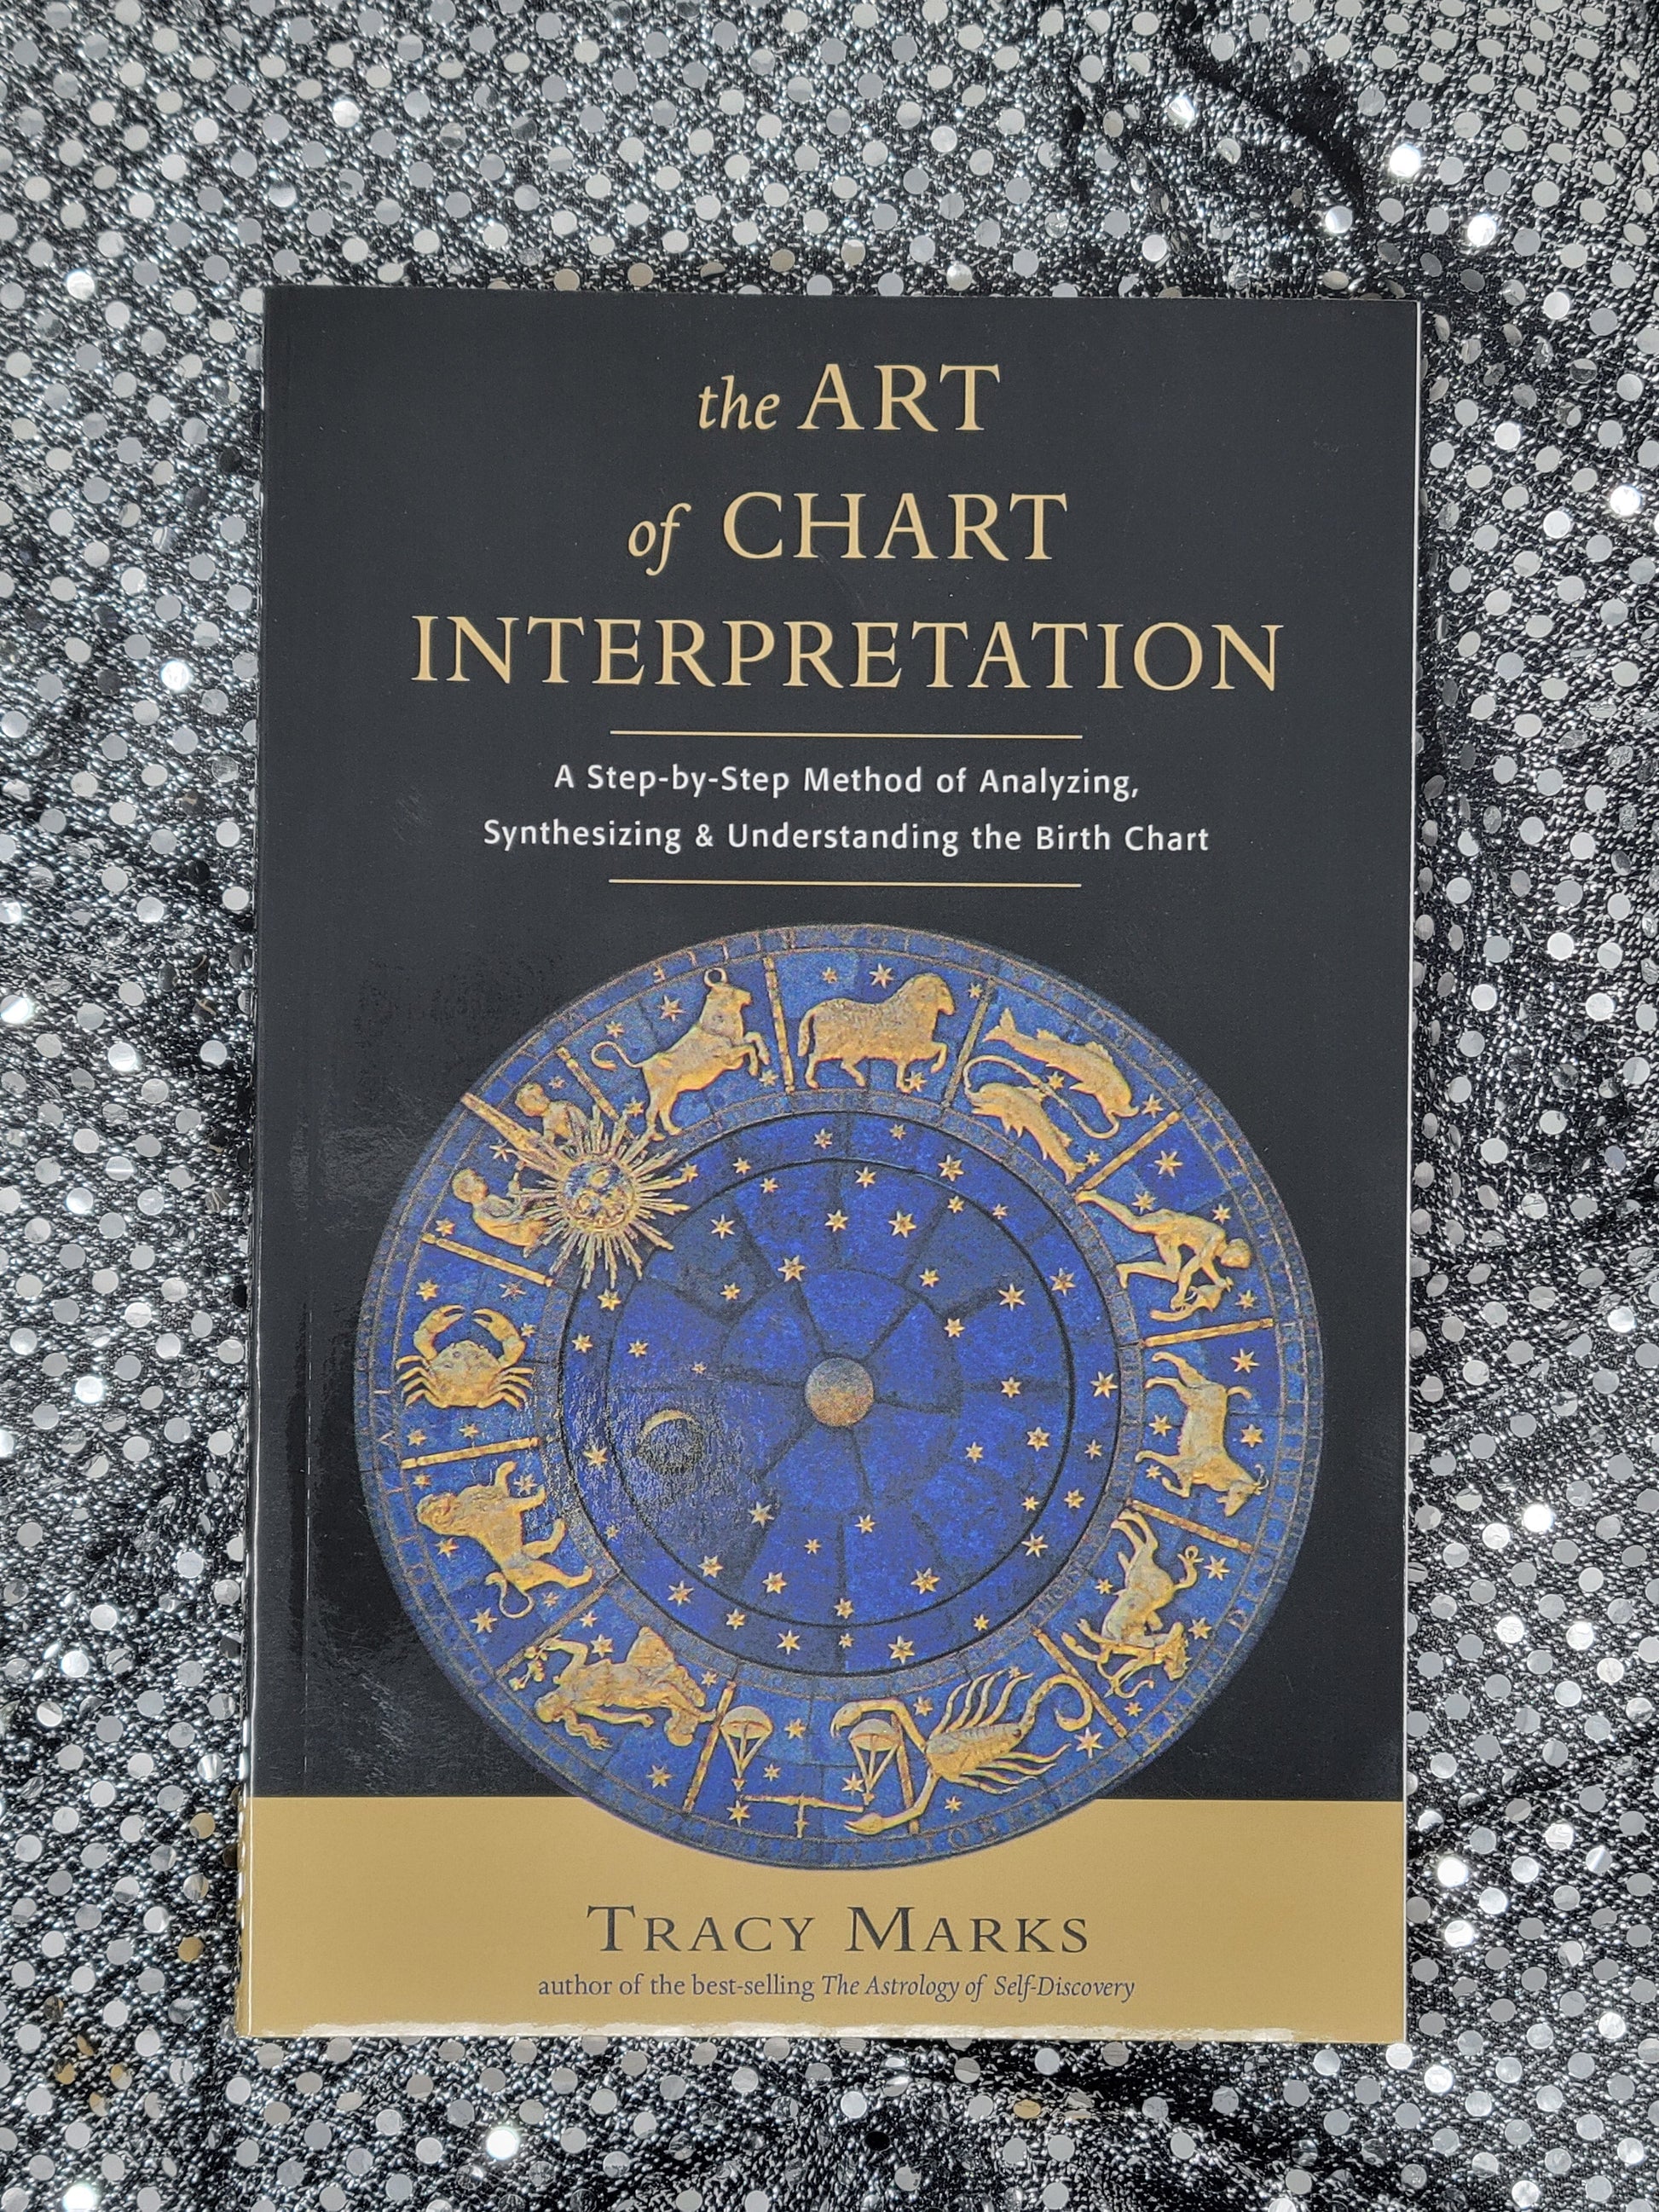 The Art of Chart Interpretation A Step-by-Step Method for Analyzing, Synthesizing, and Understanding the Birth Chart - Tracy Marks, M.A.